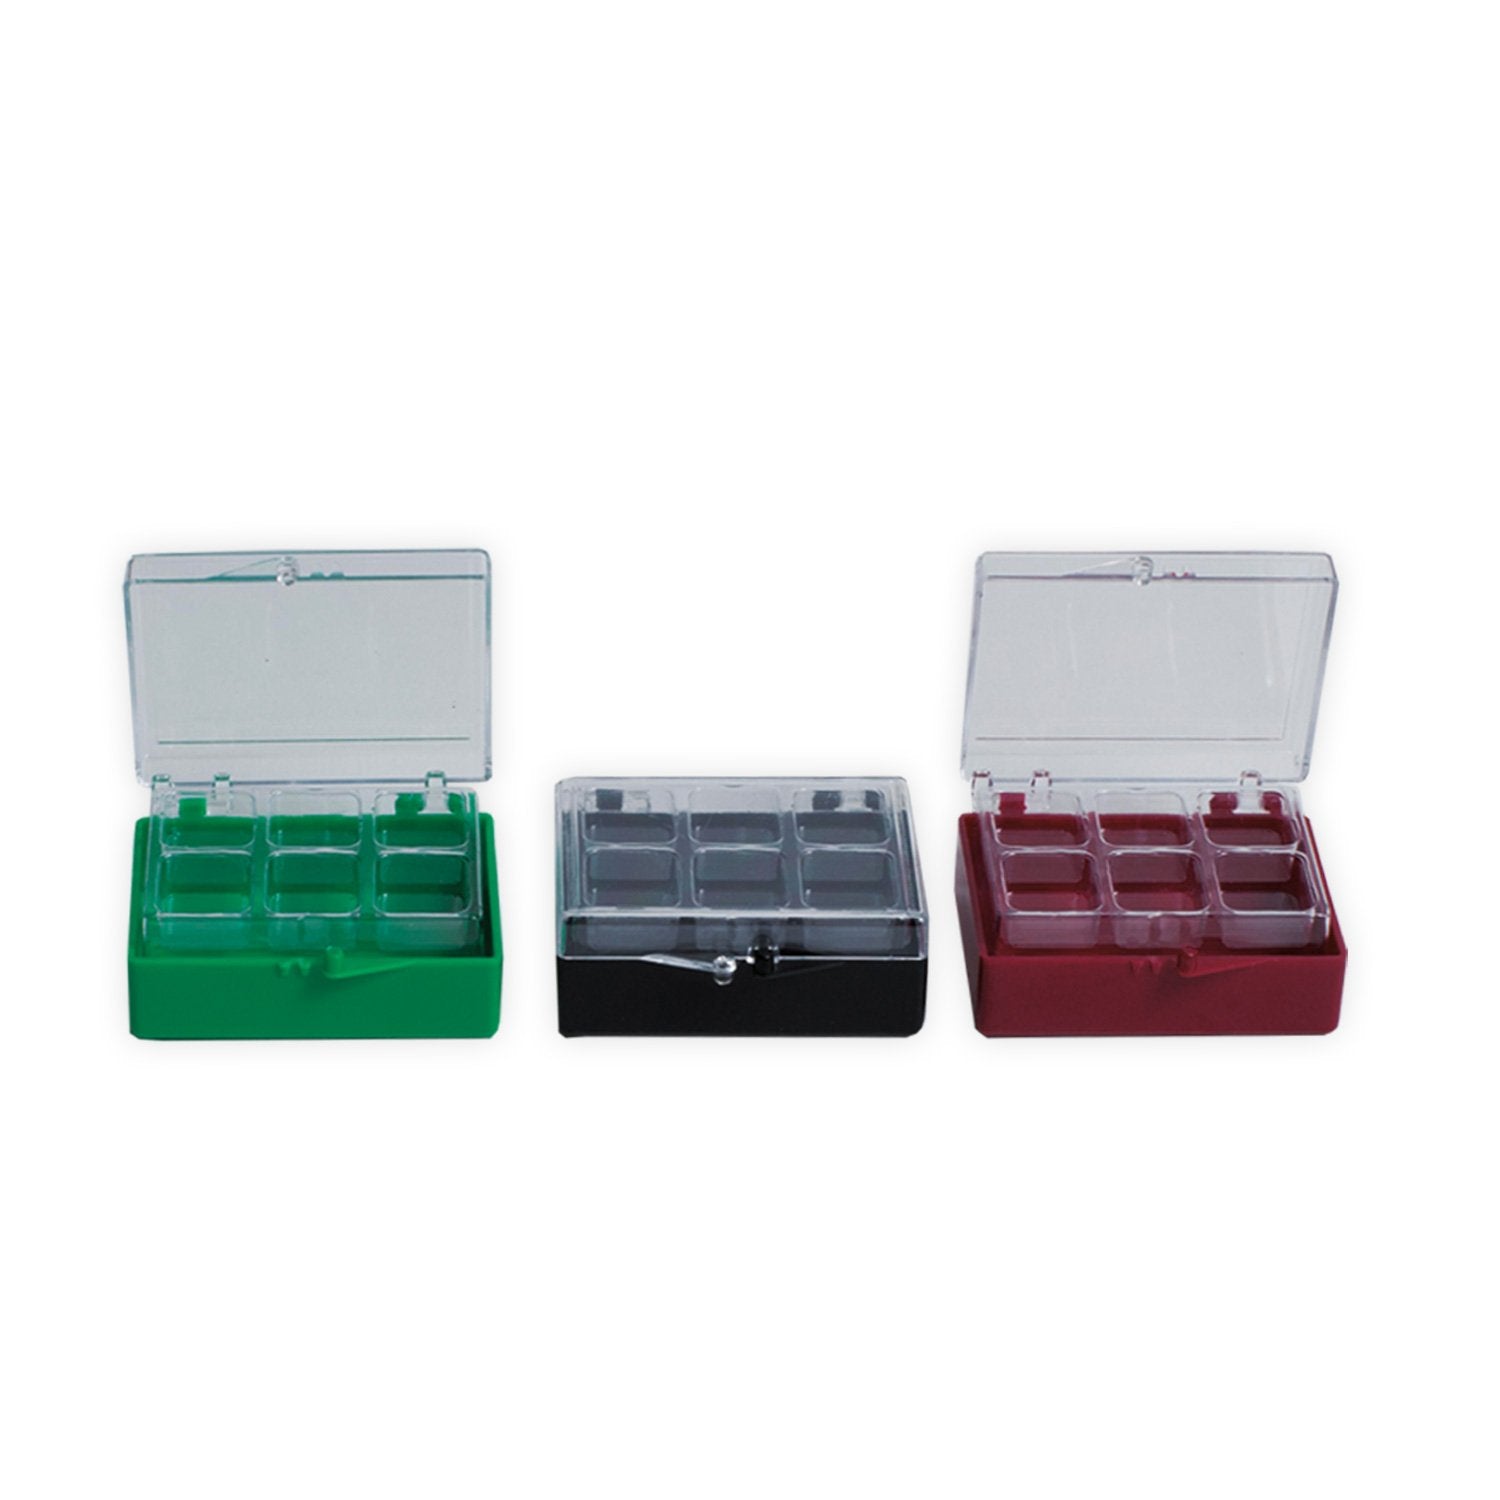 2" Rigid Boxes with V6 Plastic Inserts